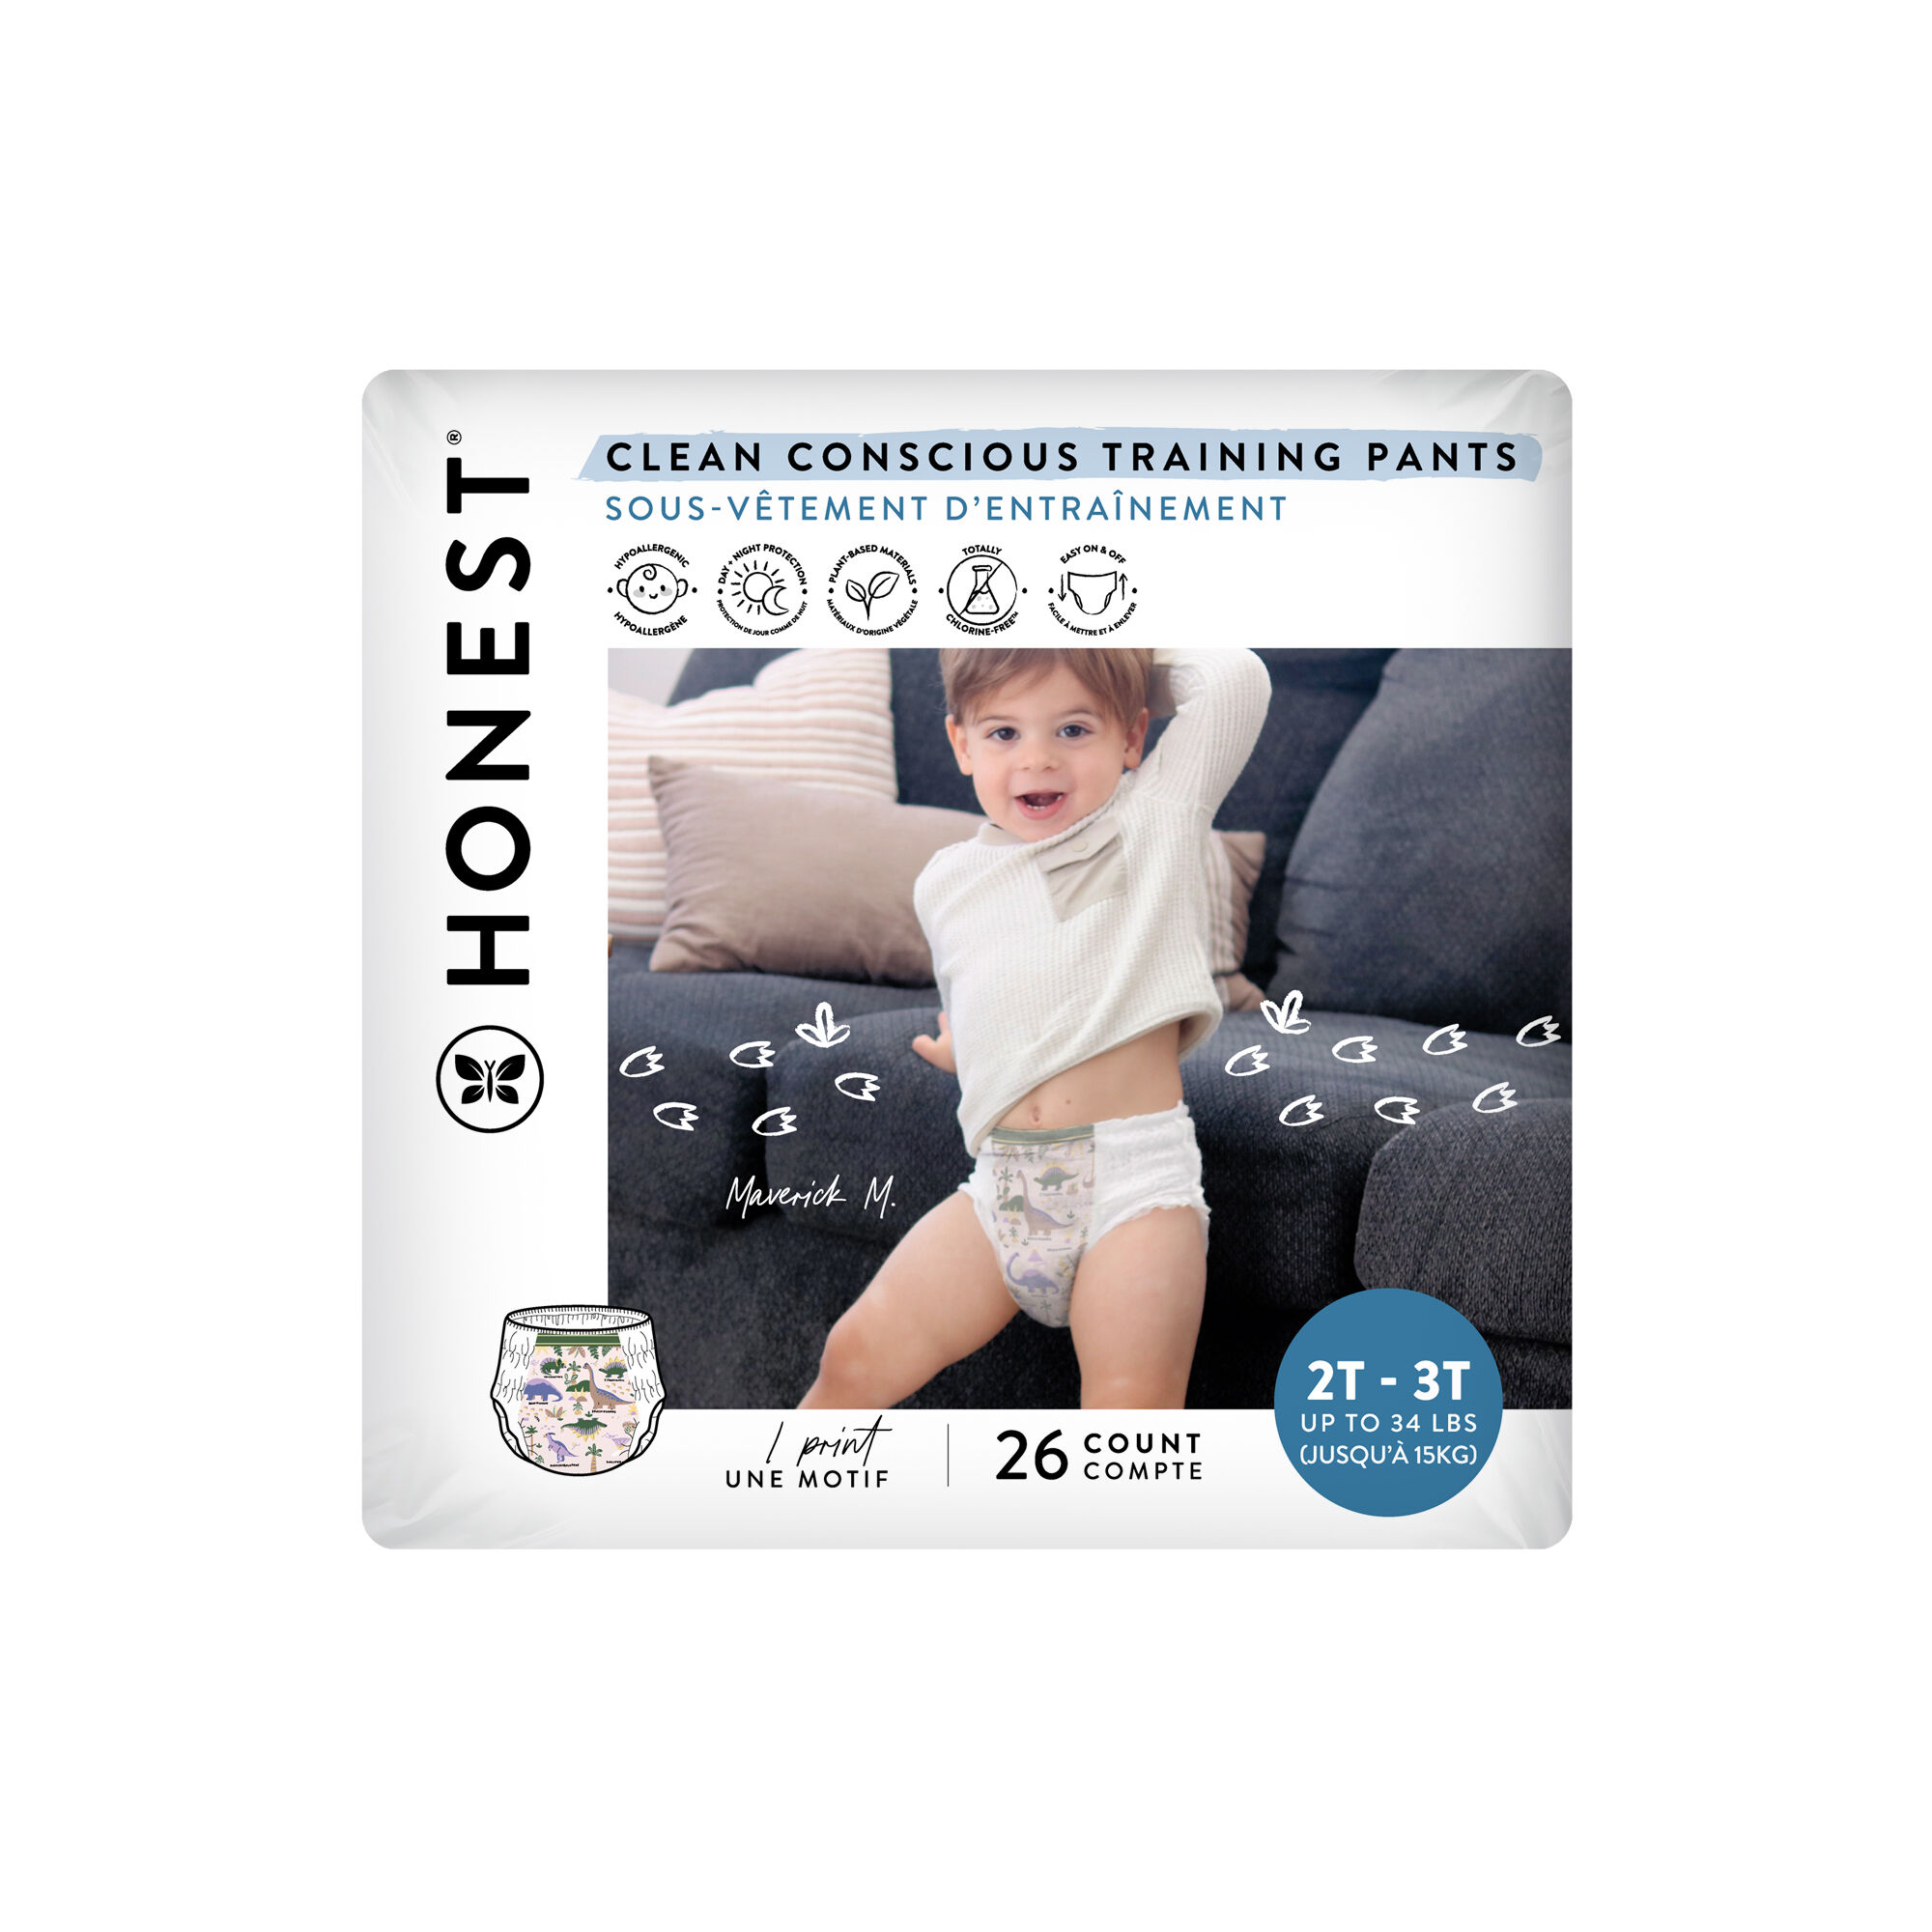 SNUGKINS Potty Training Pants for Kids. 100% Cotton. Pack of 6 (Size 2,  Fits 2-3 years) - Buy Baby Care Products in India | Flipkart.com